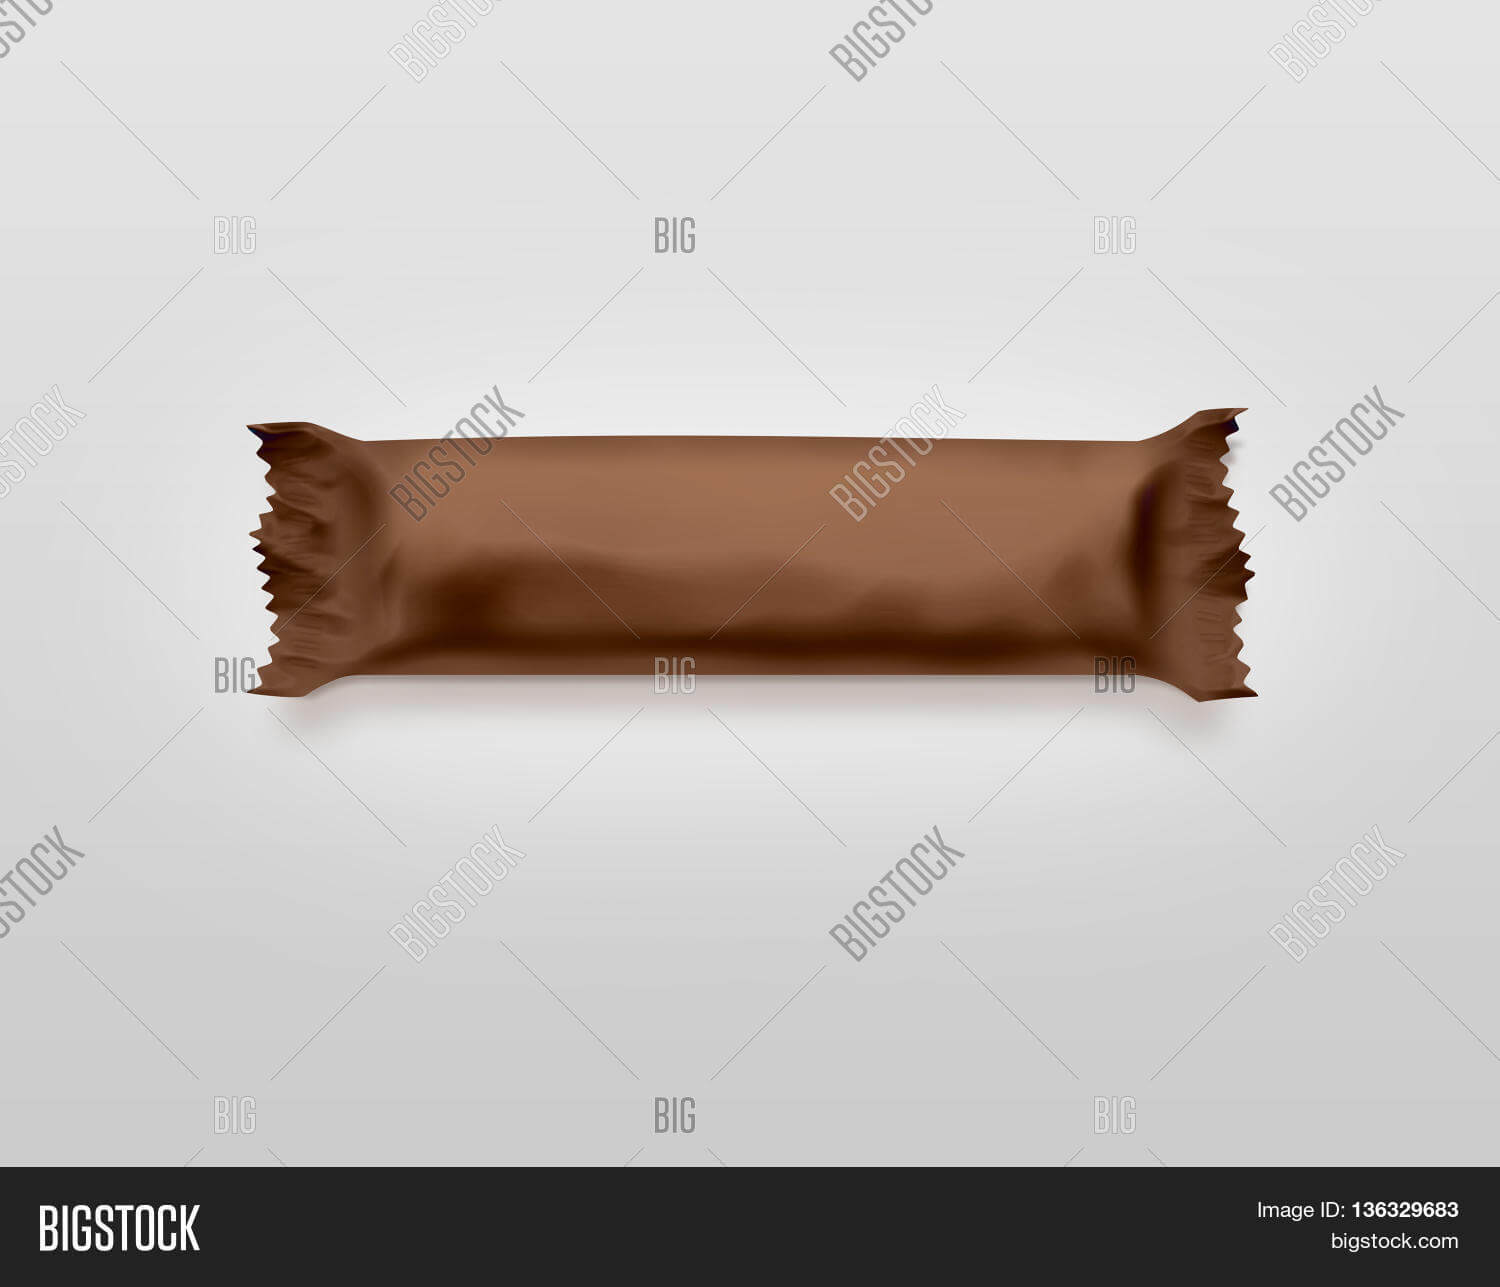 Blank Brown Candy Bar Image & Photo (Free Trial) | Bigstock Regarding Free Blank Candy Bar Wrapper Template